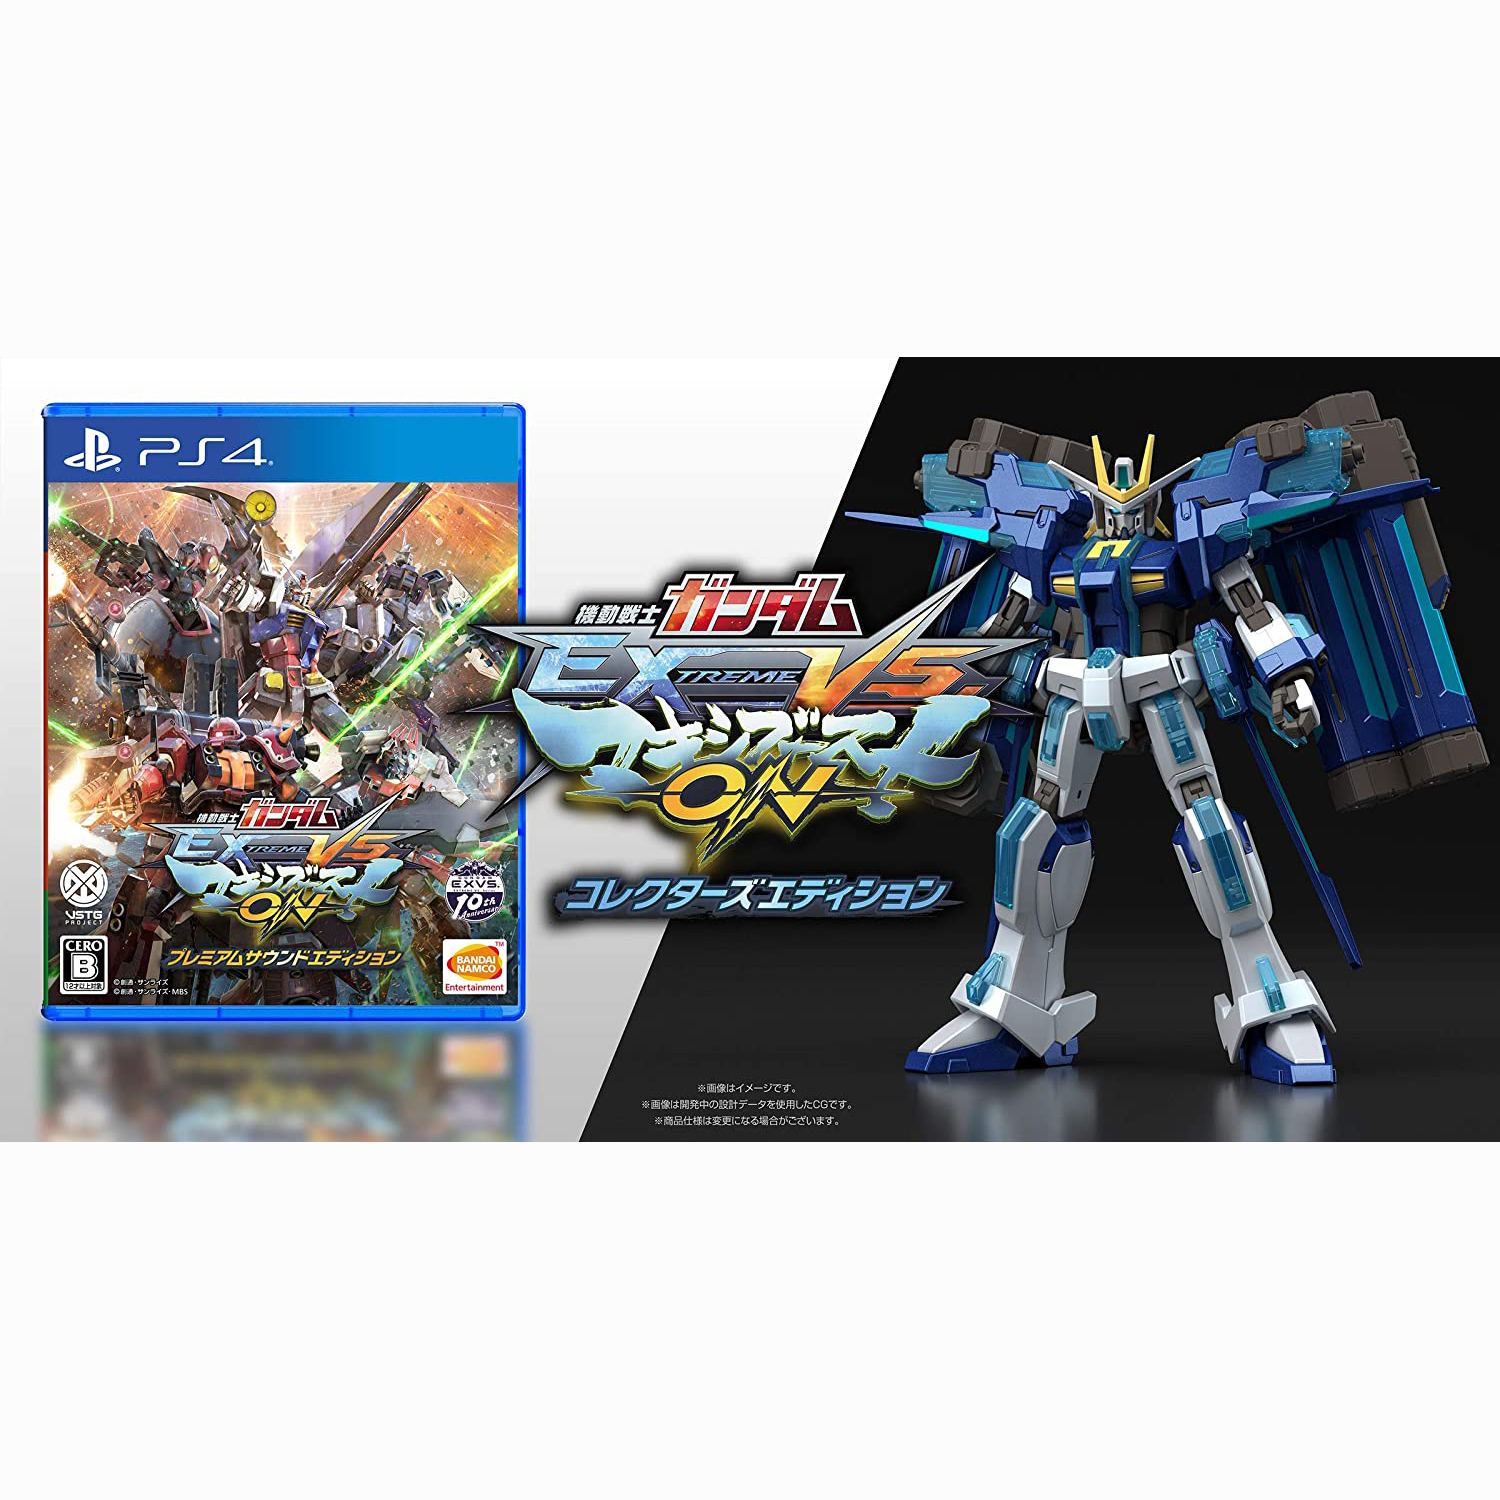 Mobile Suit Gundam Extreme Vs Maxiboost On Collector S Edition